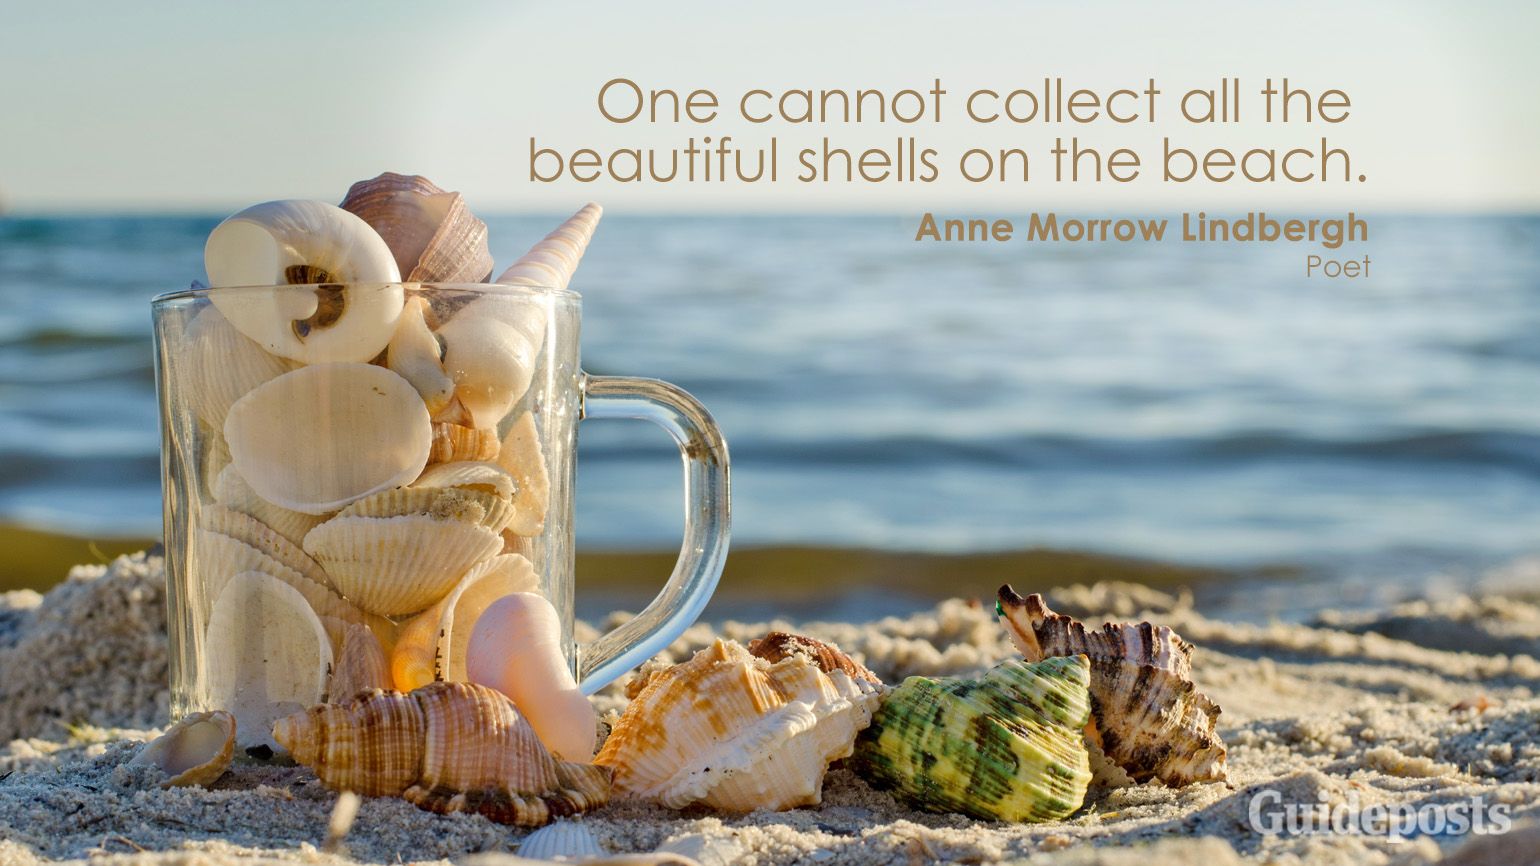 One cannot collect all the beautiful shells on the beach. Anne Morrow Lindbergh